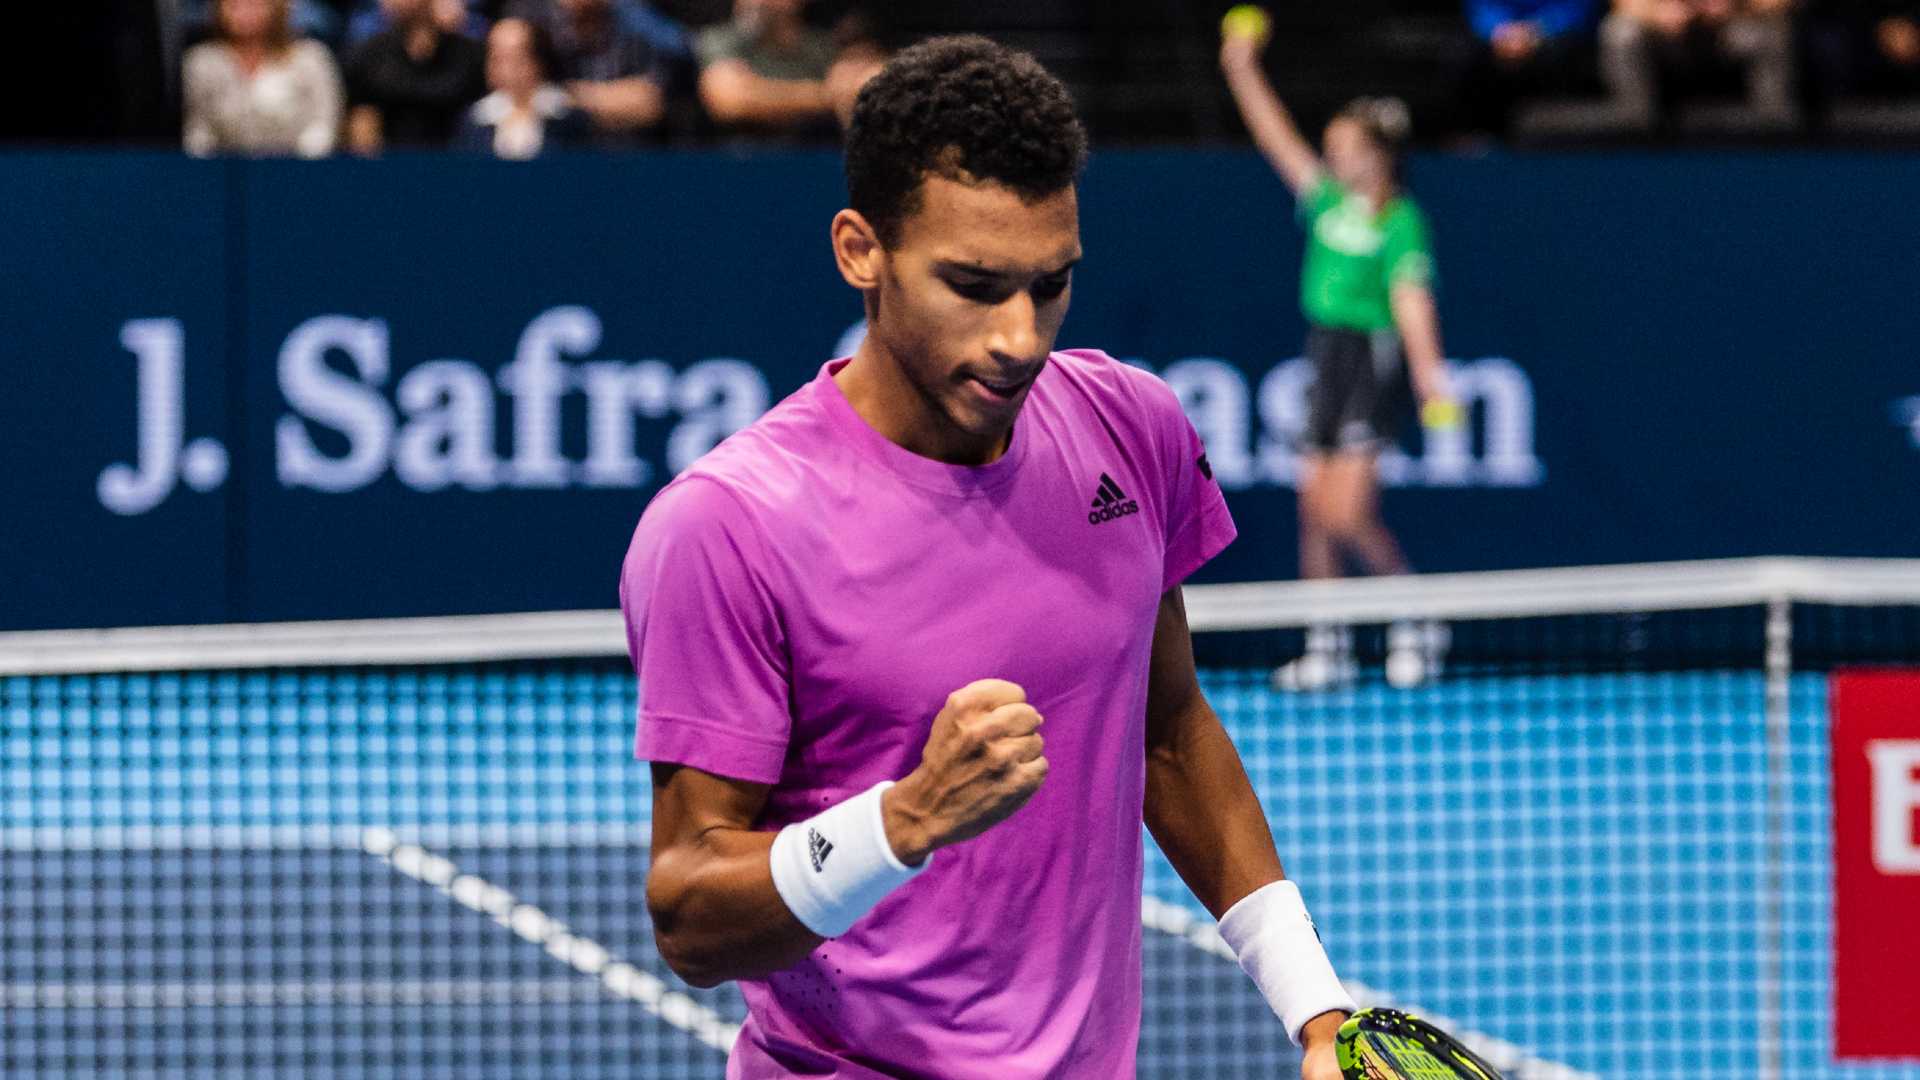 Felix Auger-Aliassime drops just seven points in the second set of his Basel victory.